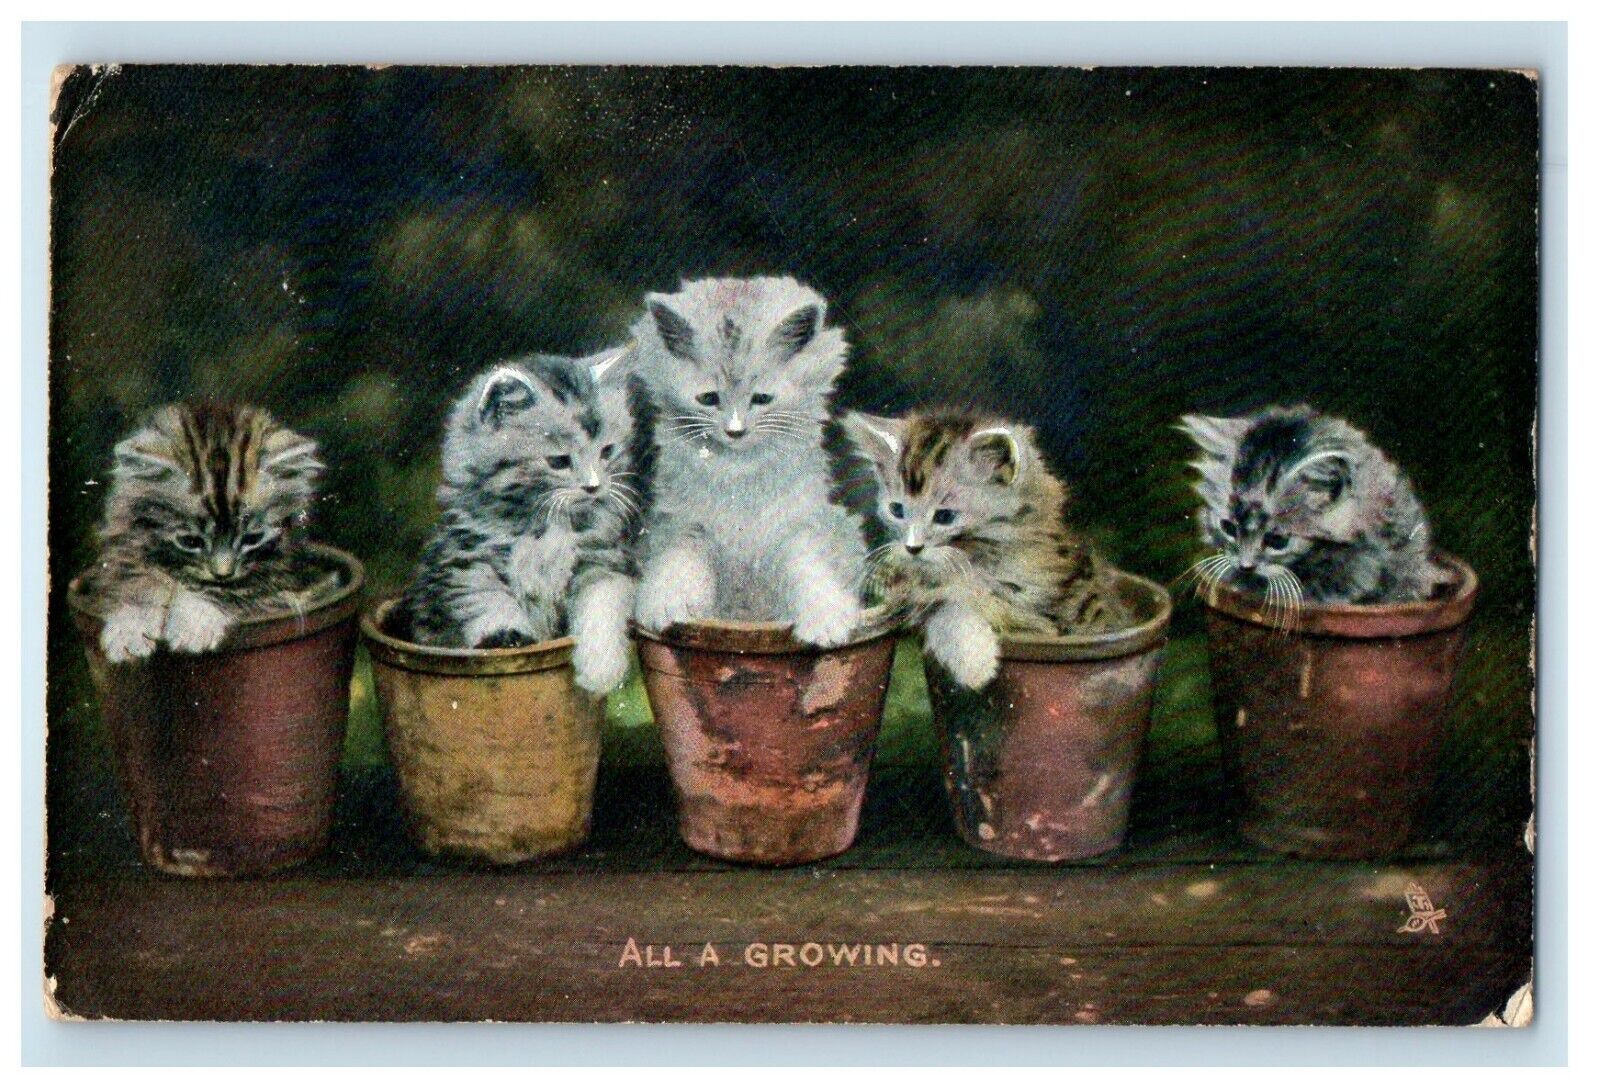 1909 Two Cute Cats Kittens Tuck Flower Pots Animal Life Perry Maine Postcard